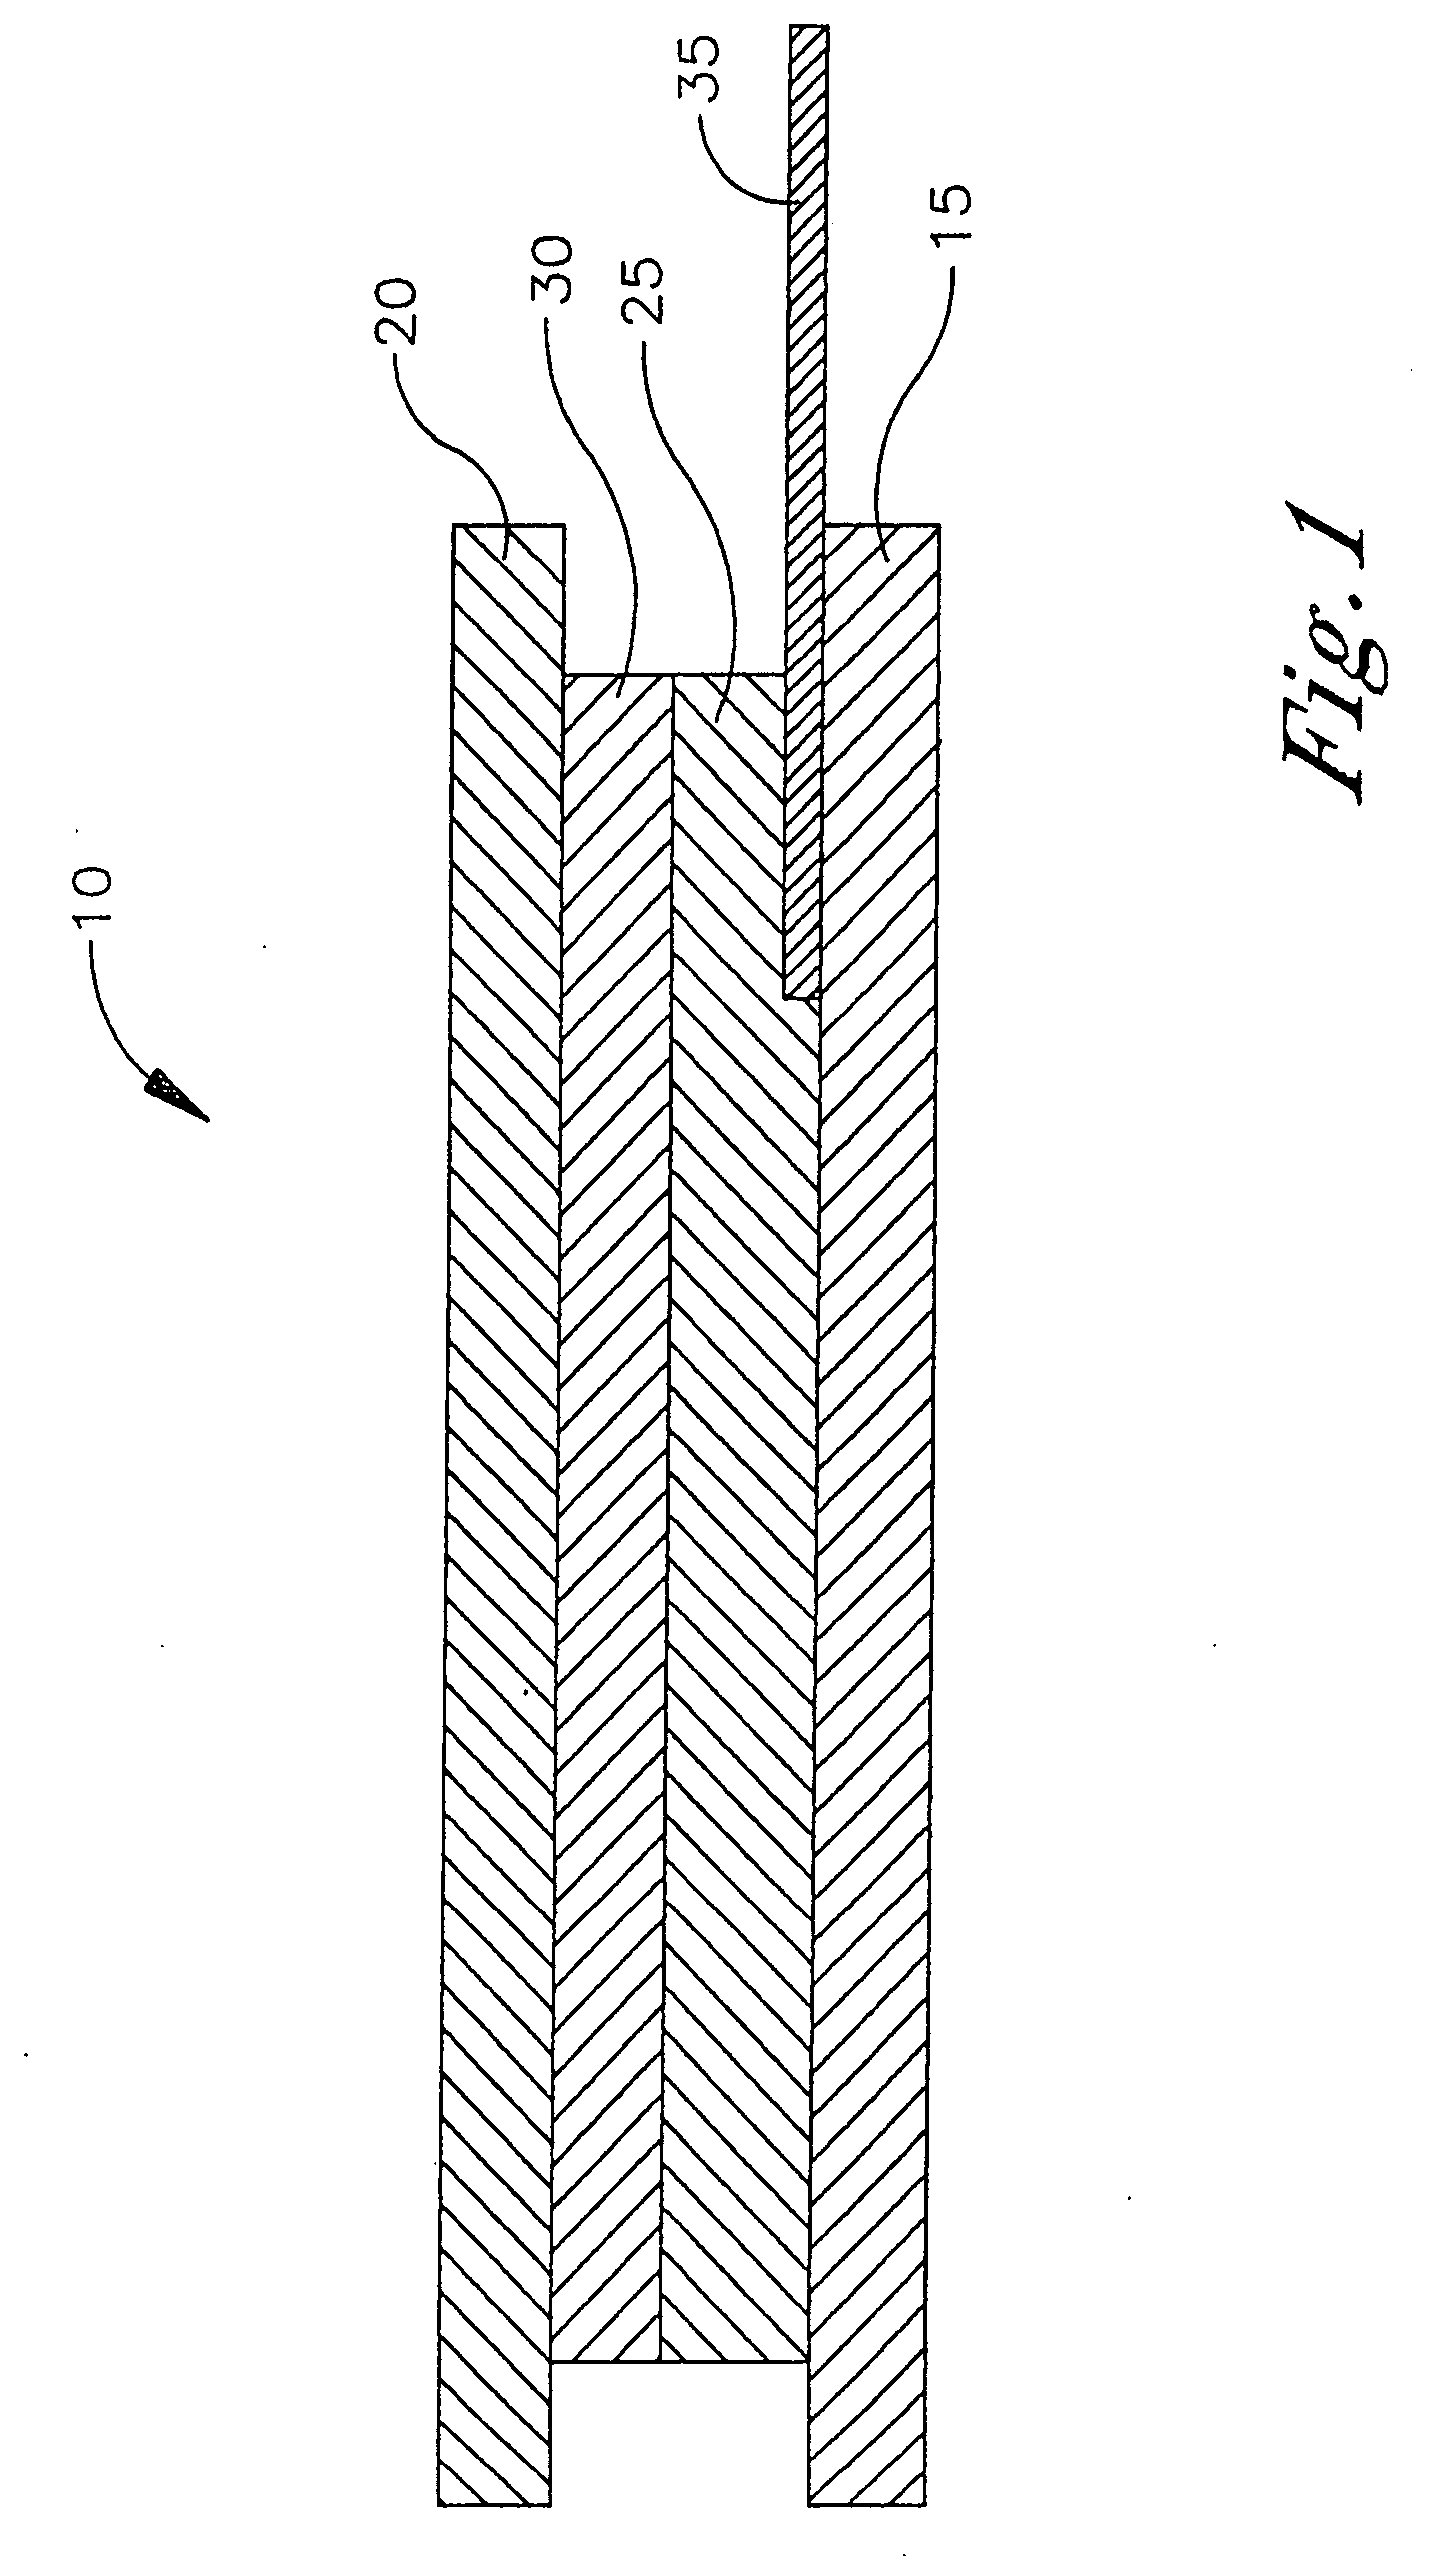 Water-dispersible patch containing an active agent for dermal delivery